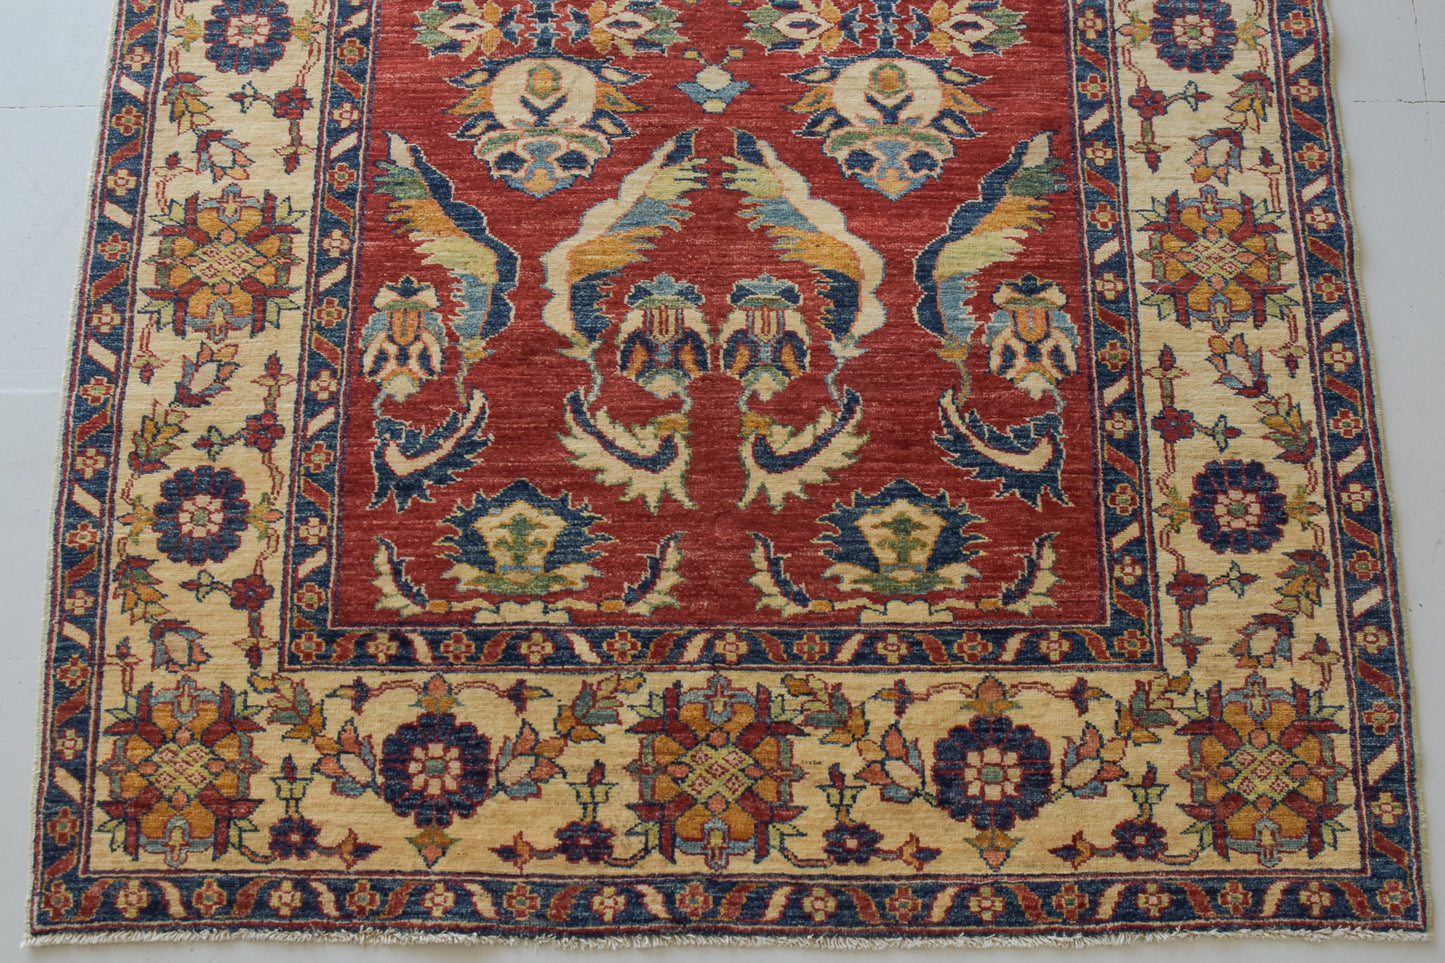 Sultanabad Style - Traditional Handwoven Rug